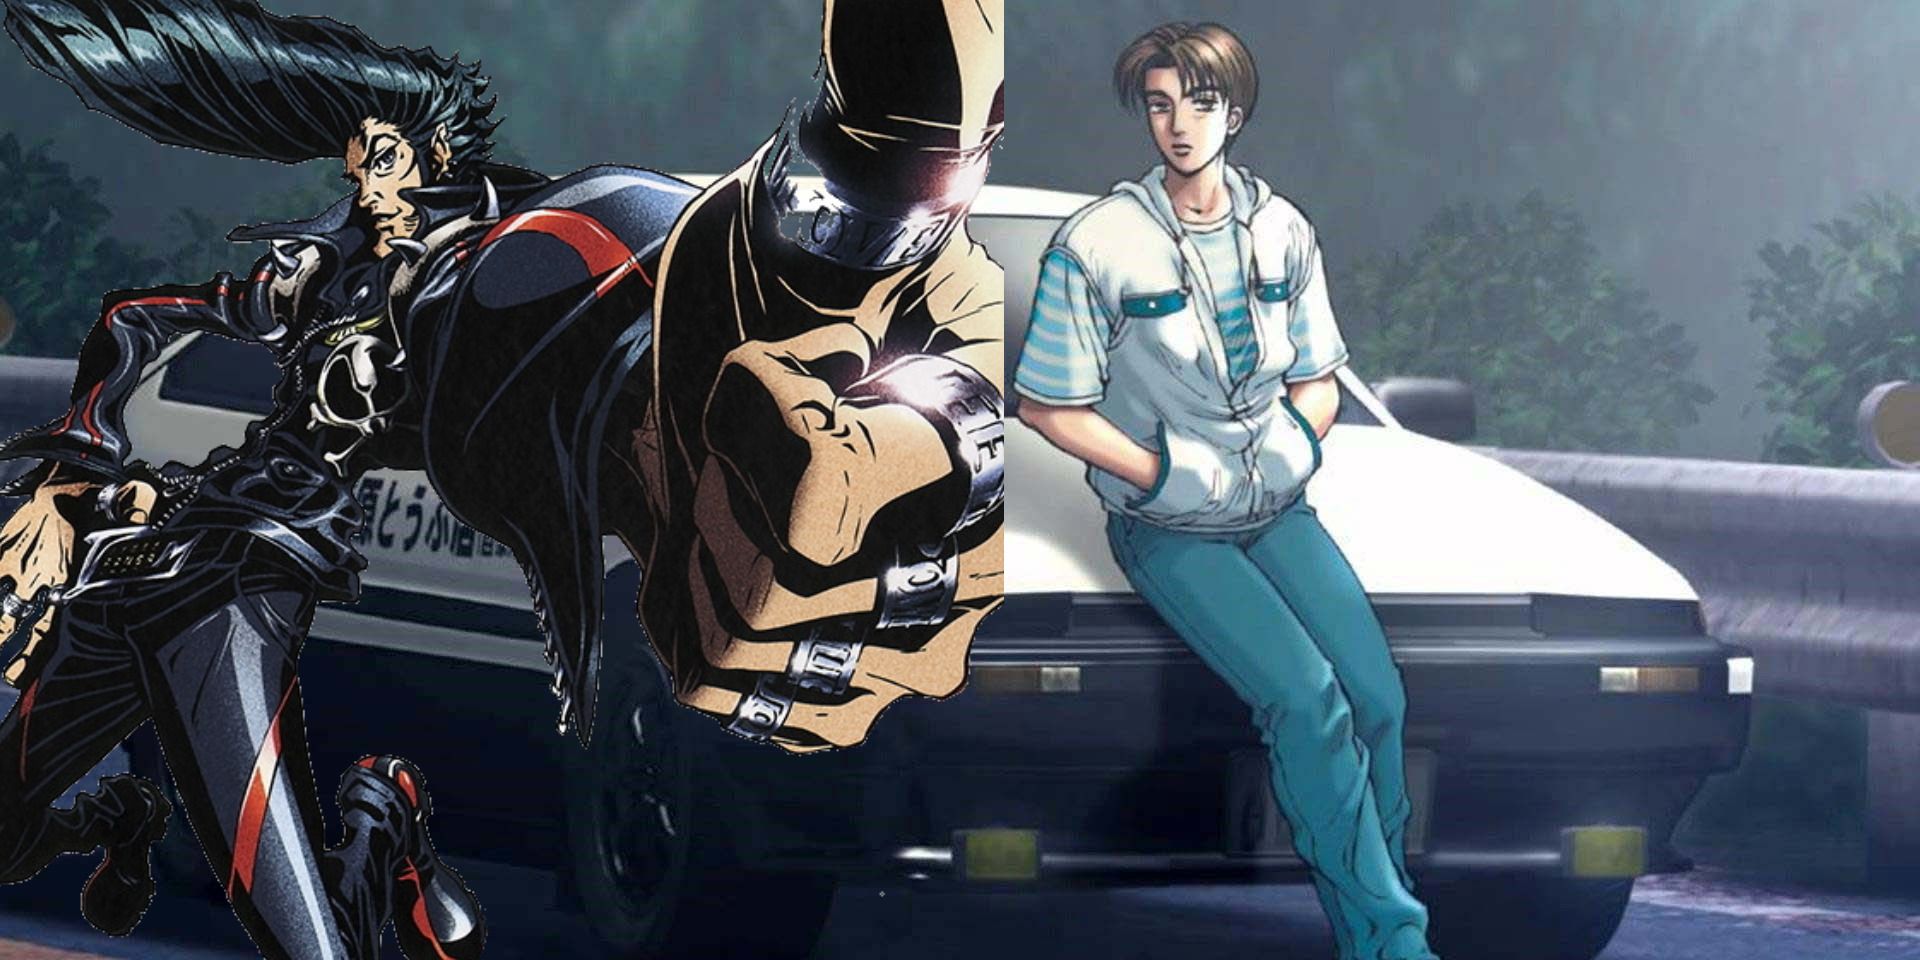 Takumi Fujiwara from Initial D leaning against a car and JP from Redline giving a thumb-up